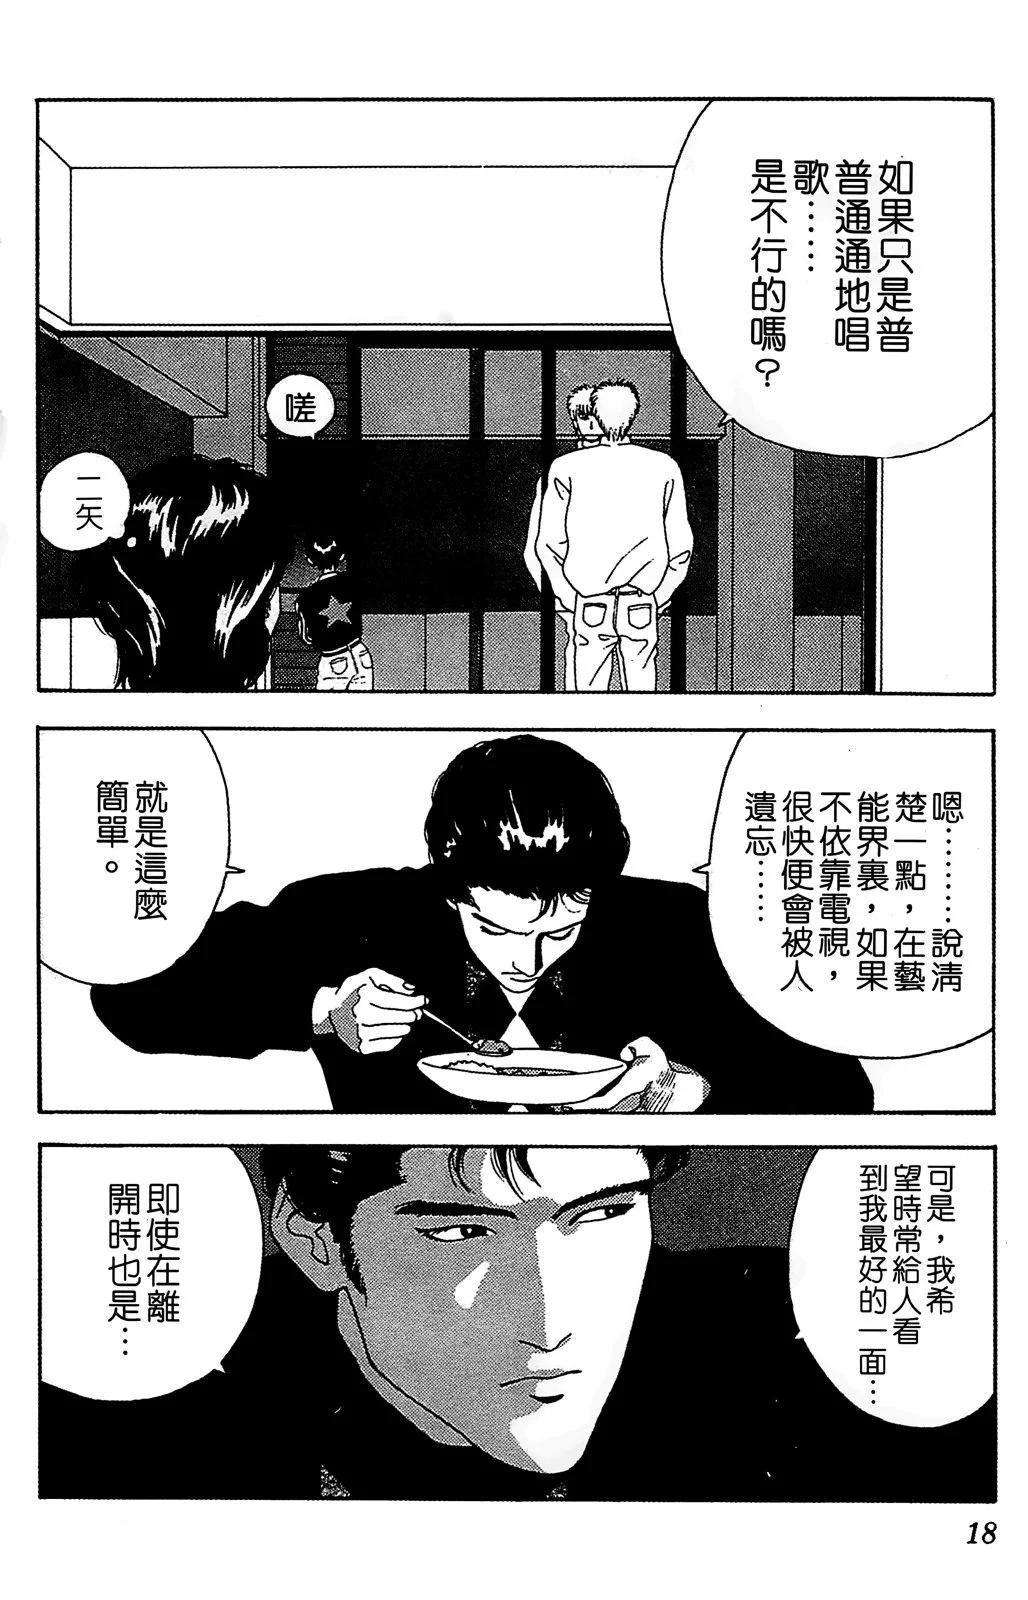 TO-Y - 第10卷(1/4) - 5